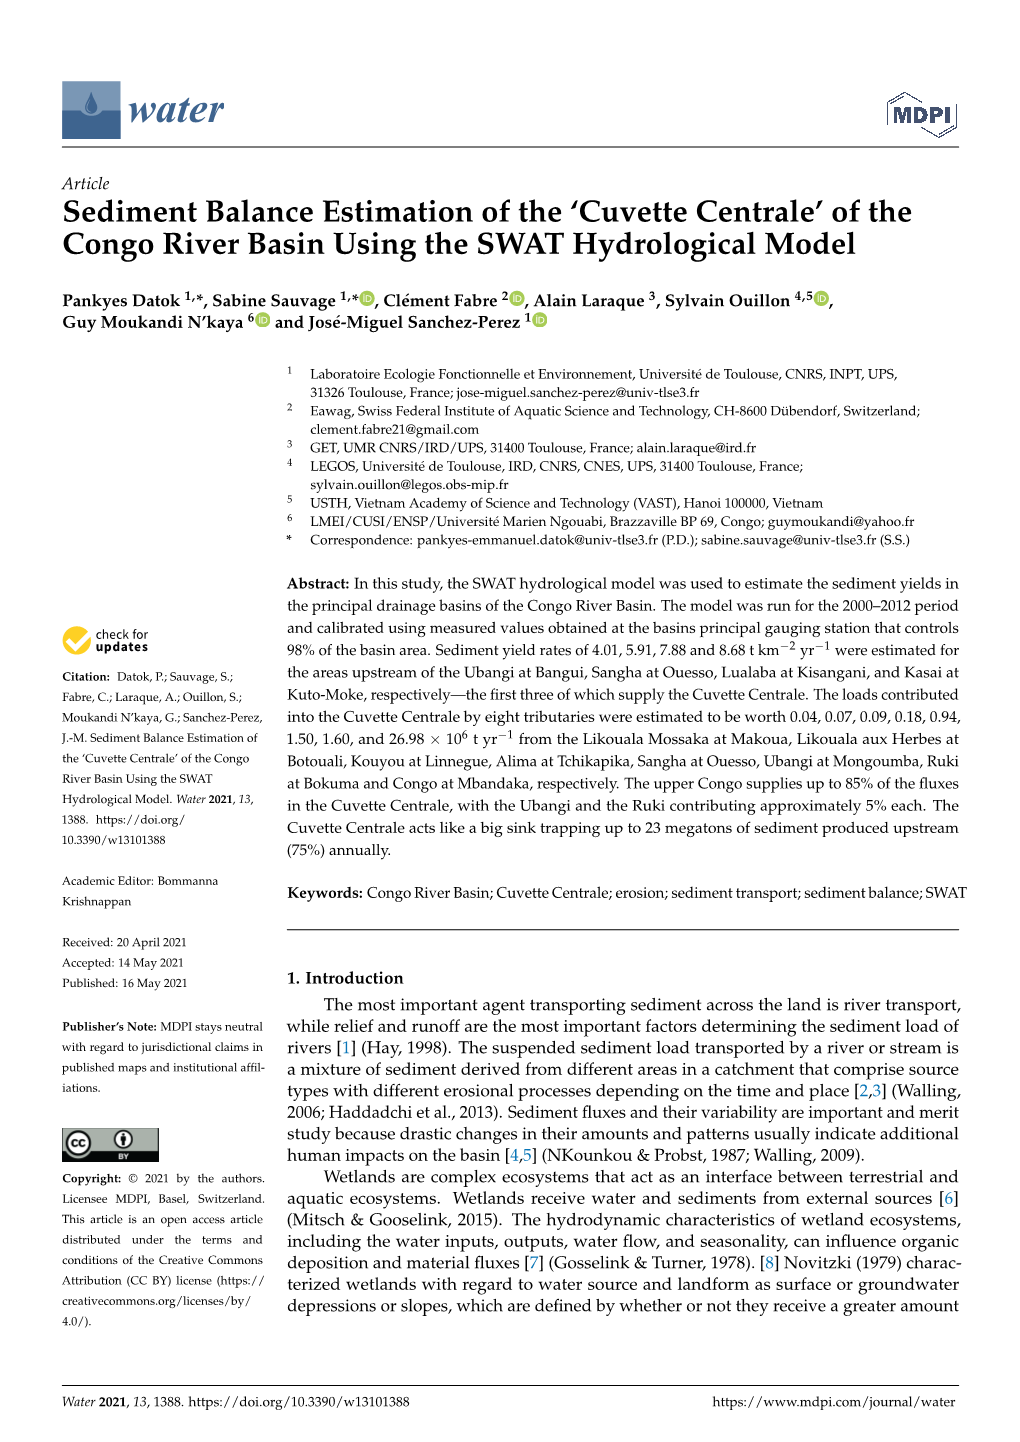 Sediment Balance Estimation of the 'Cuvette Centrale' of the Congo River Basin Using the SWAT Hydrological Model